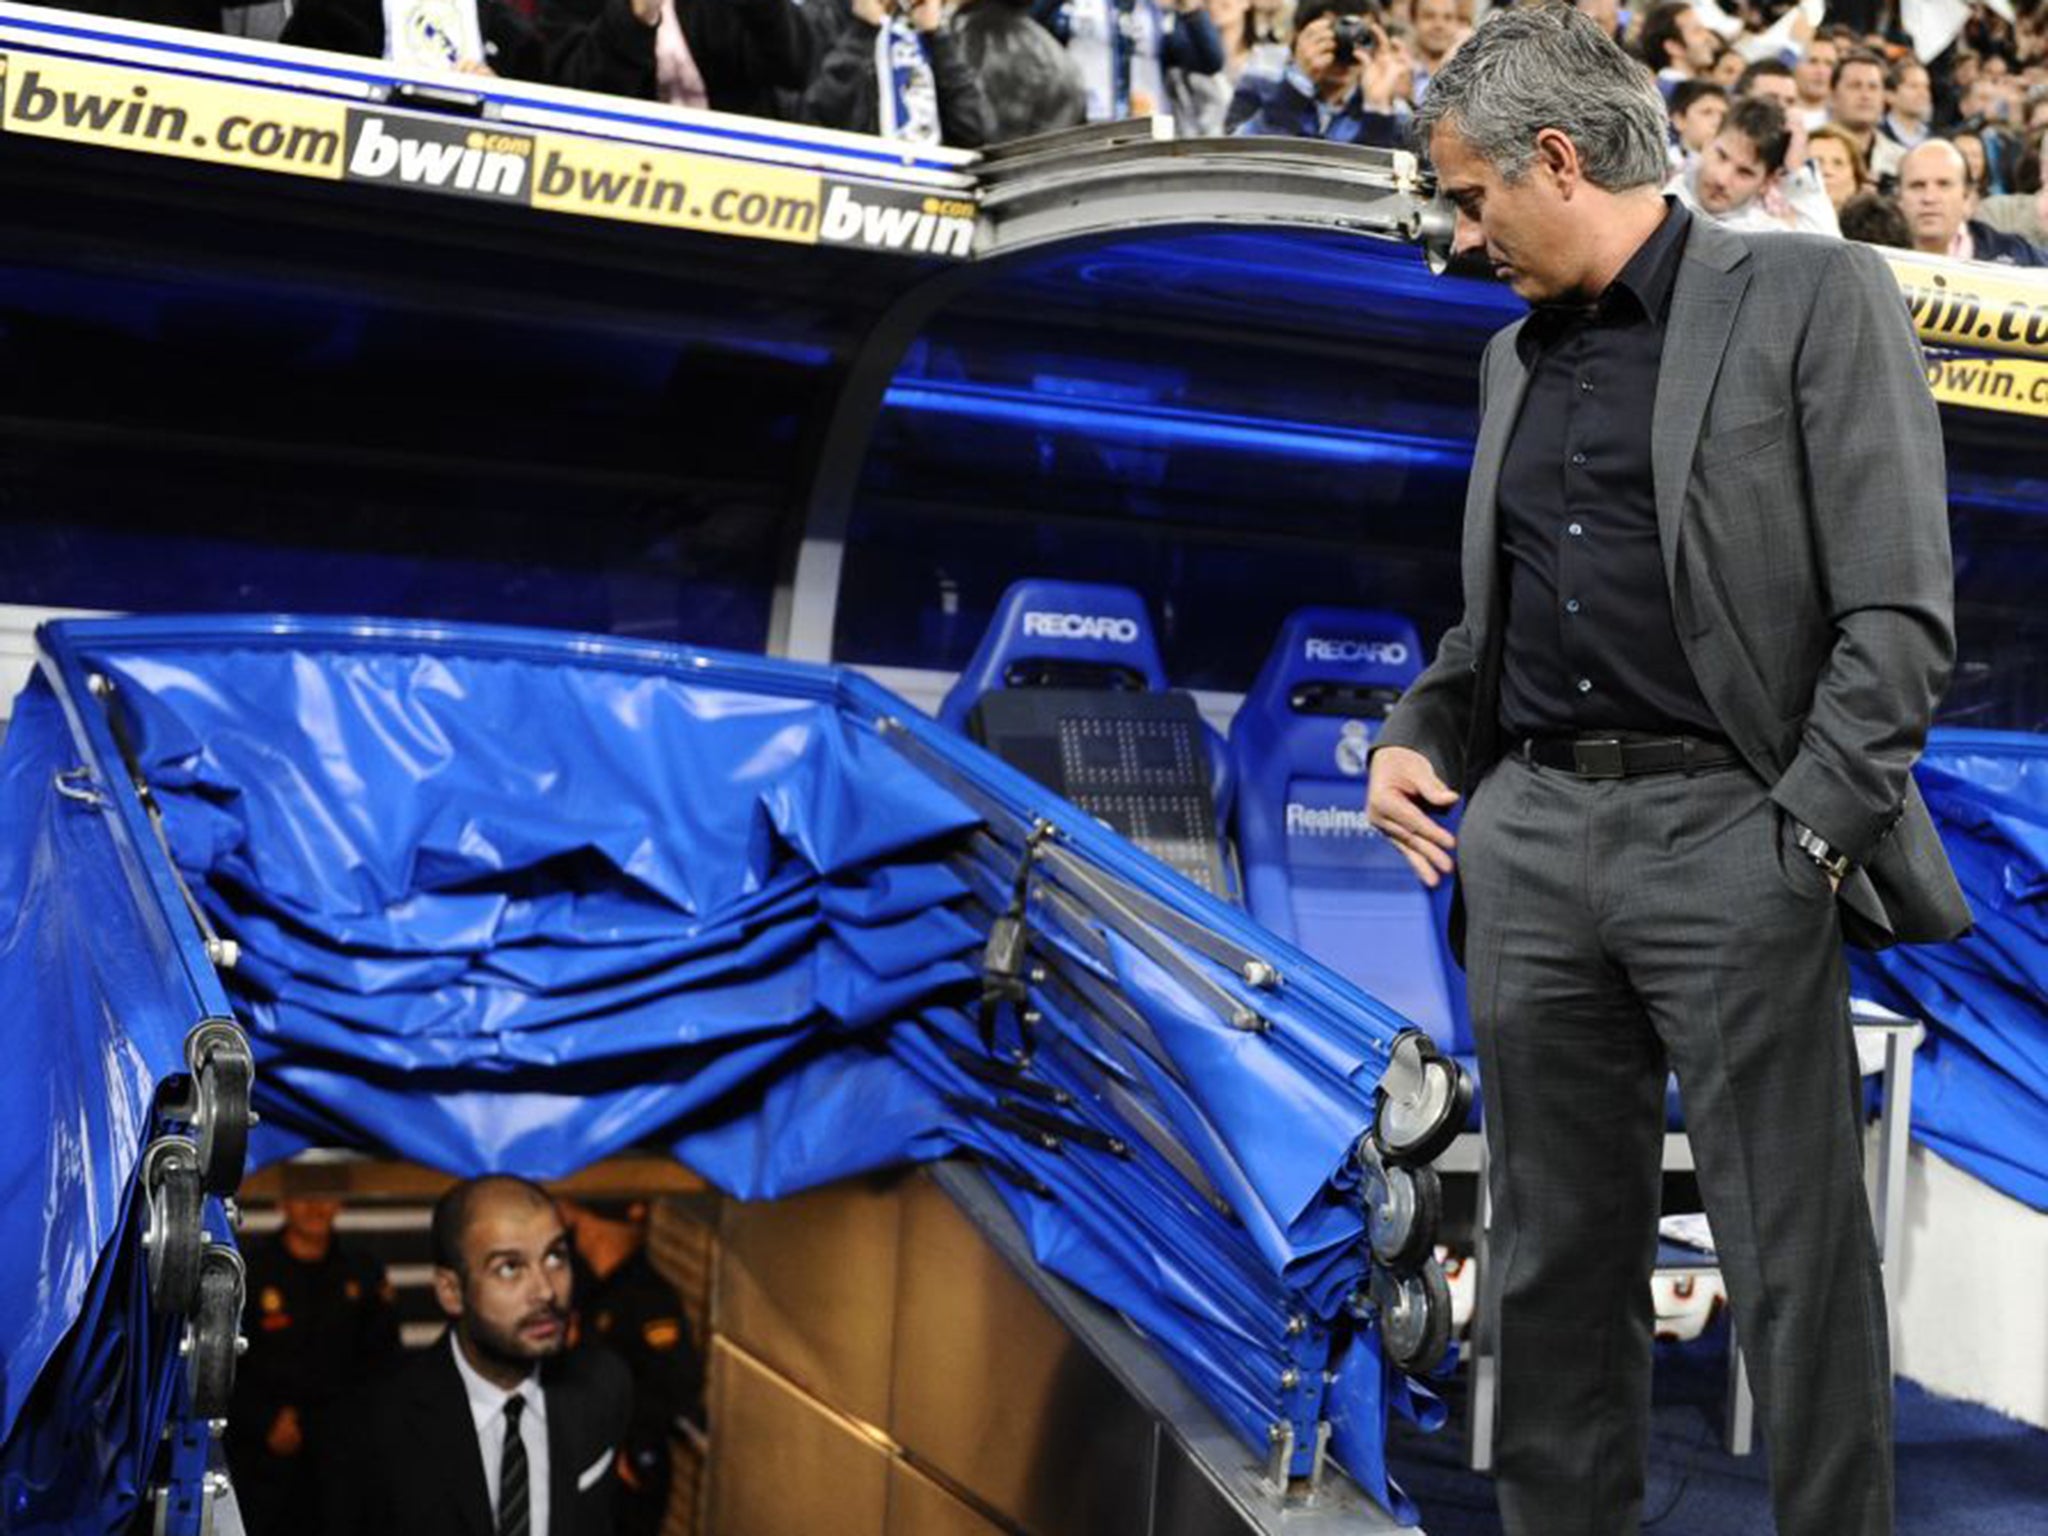 Jose Mourinho, right, and Pep Guardiola before El Clasico in 2011, during their times as Real Madrid and Barcelona coach respectively